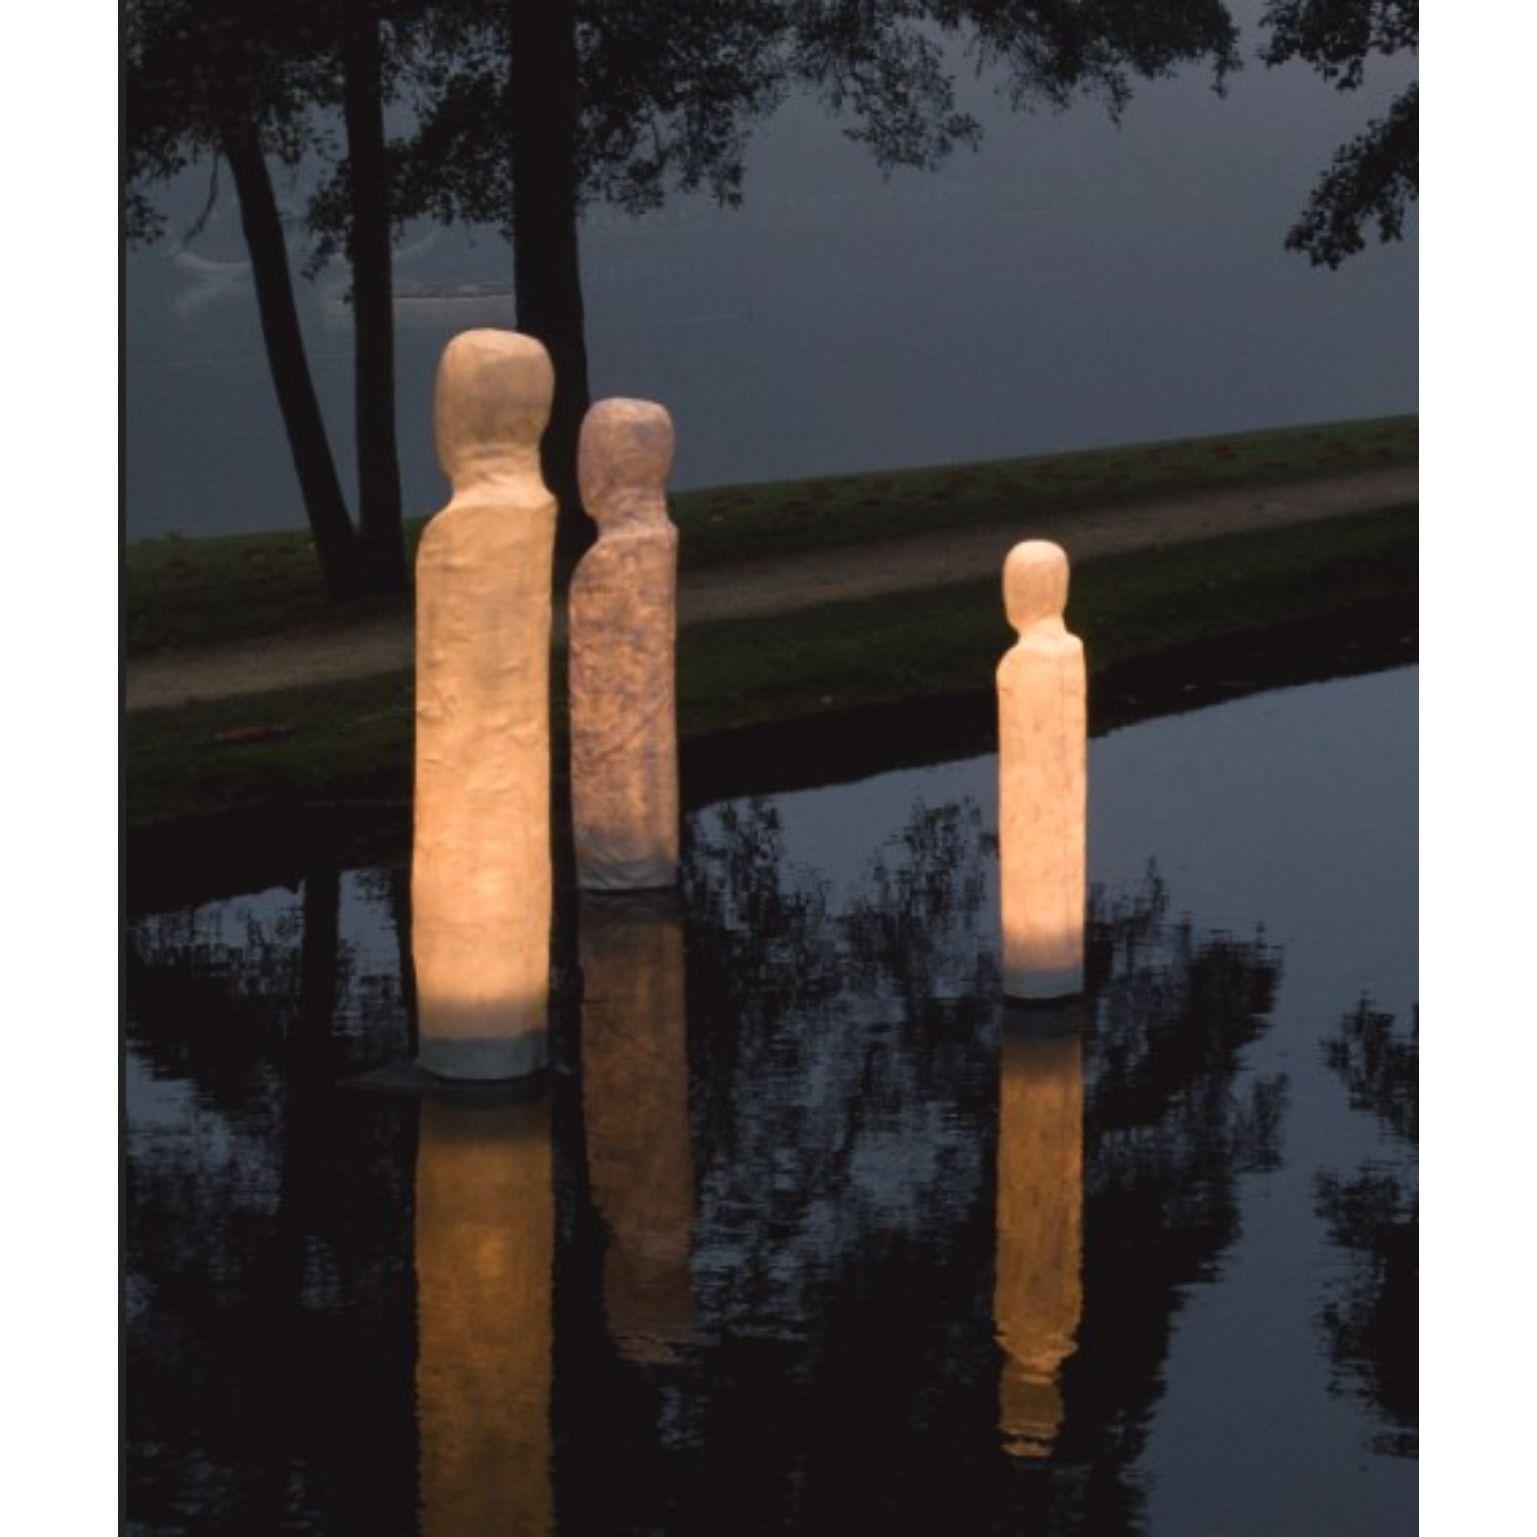 A set of 3 anonymus family Light sculptures by Atelier Haute Cuisine
Dimensions: 180 x 28 cm, 185 x 34, 210 x 41 cm 
Materials: Fiberglass, UV, weather resistant topcoat, E27 LED, metal base
 
This serie of light sculptures is created through